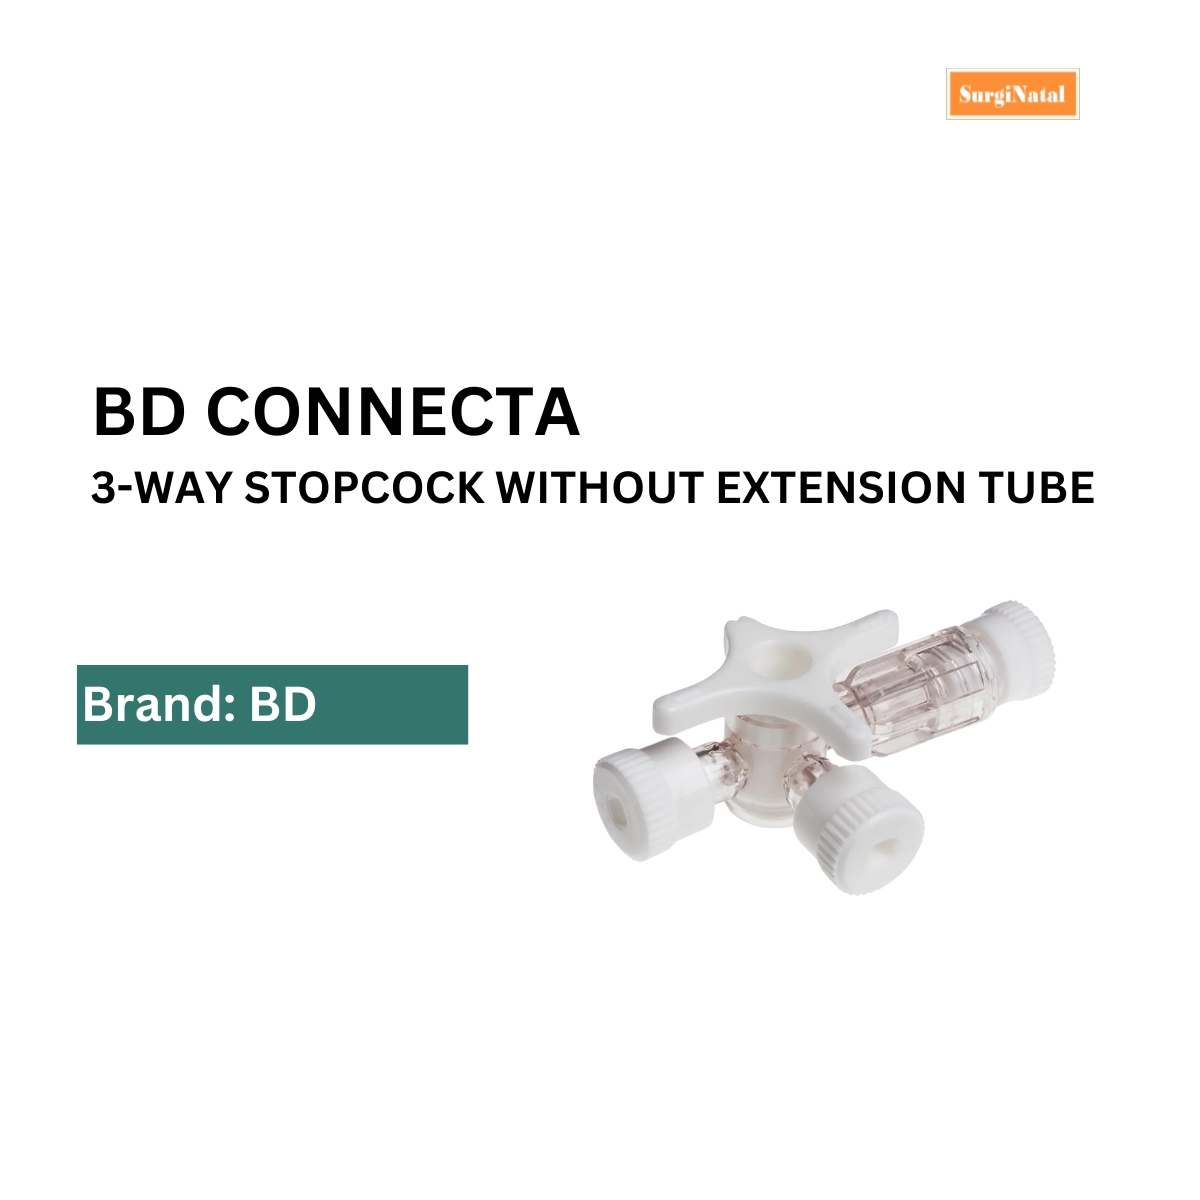 bd connecta 3-way stopcock - iv cannula accessories